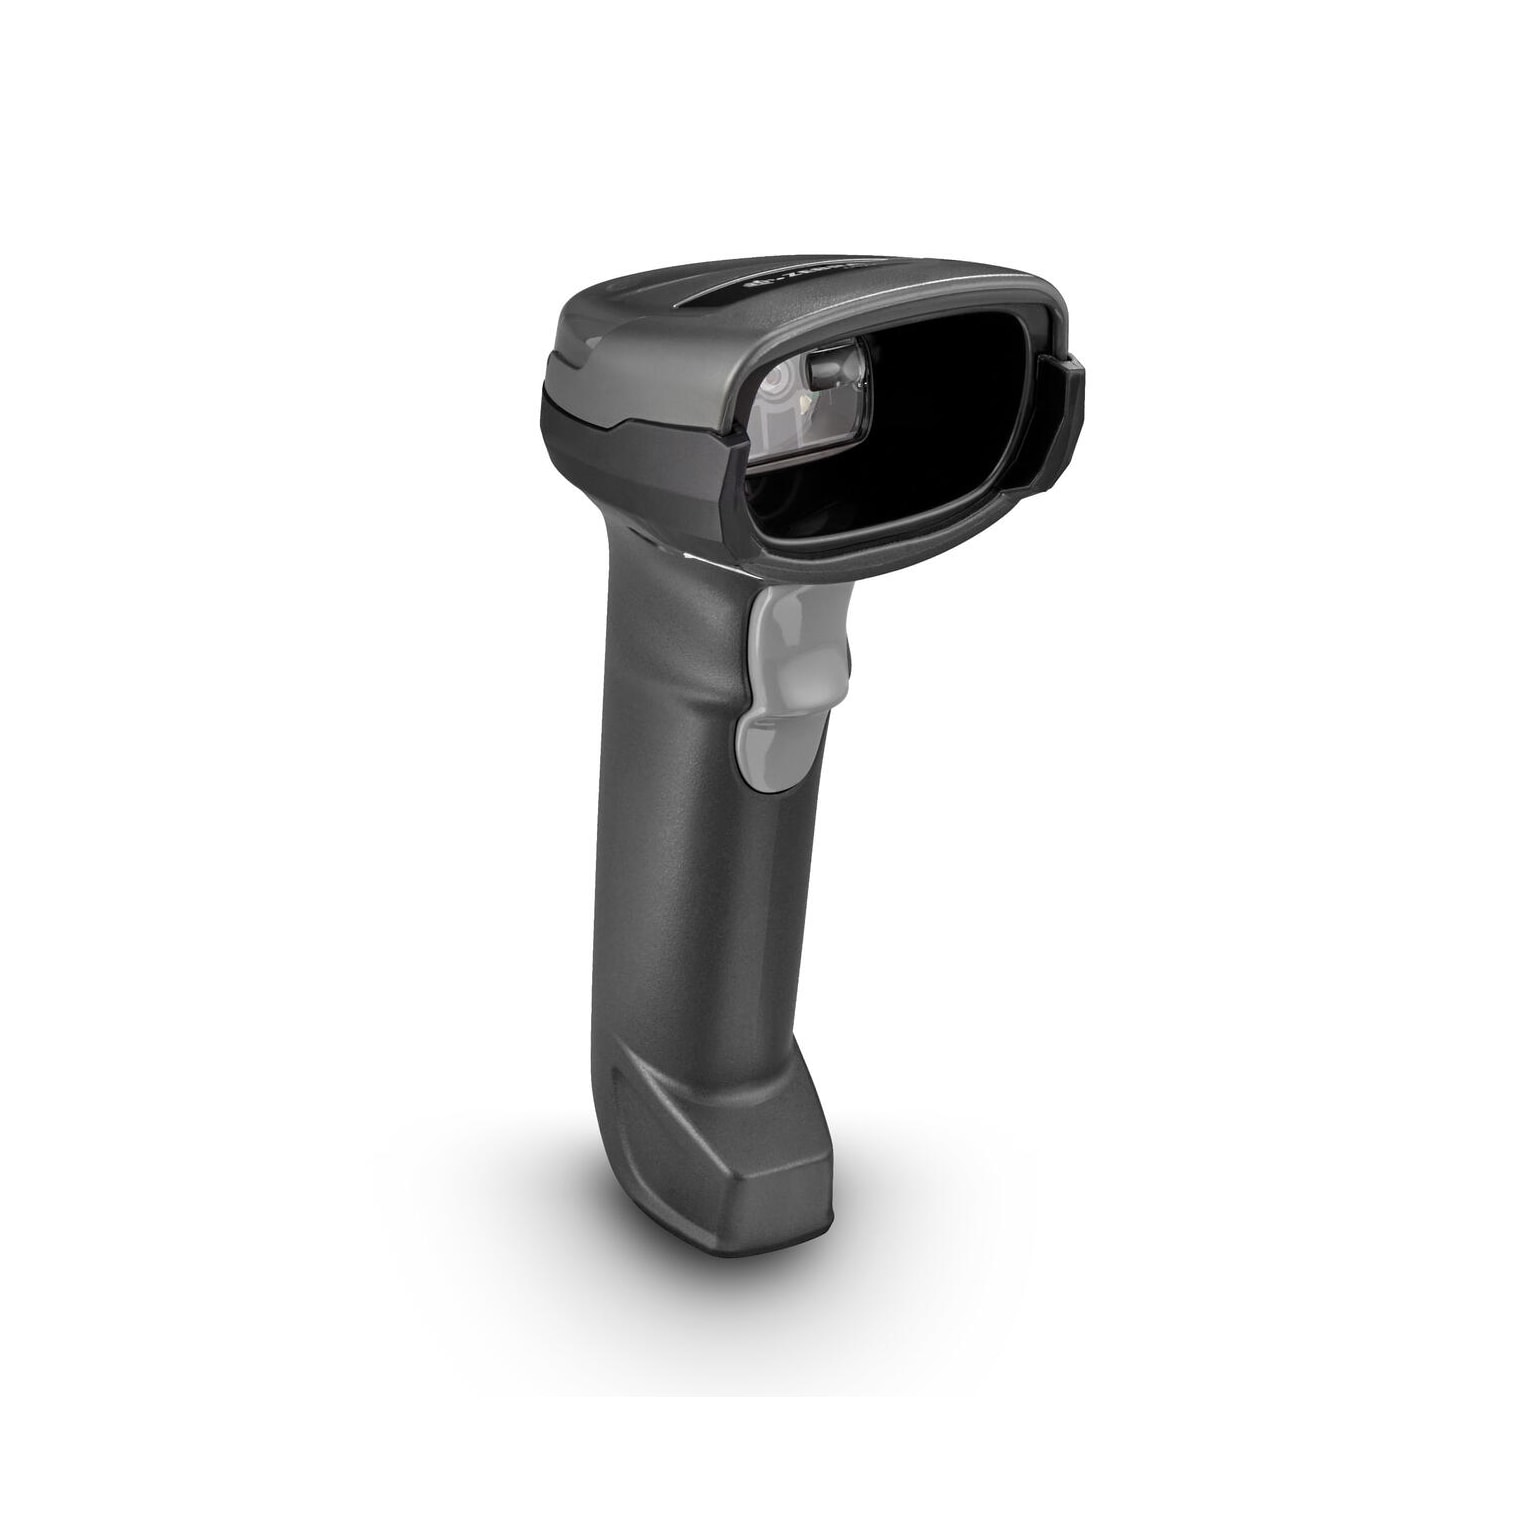 Zebra Ds2278 Barcode Scanner Barcodes For Business 8010